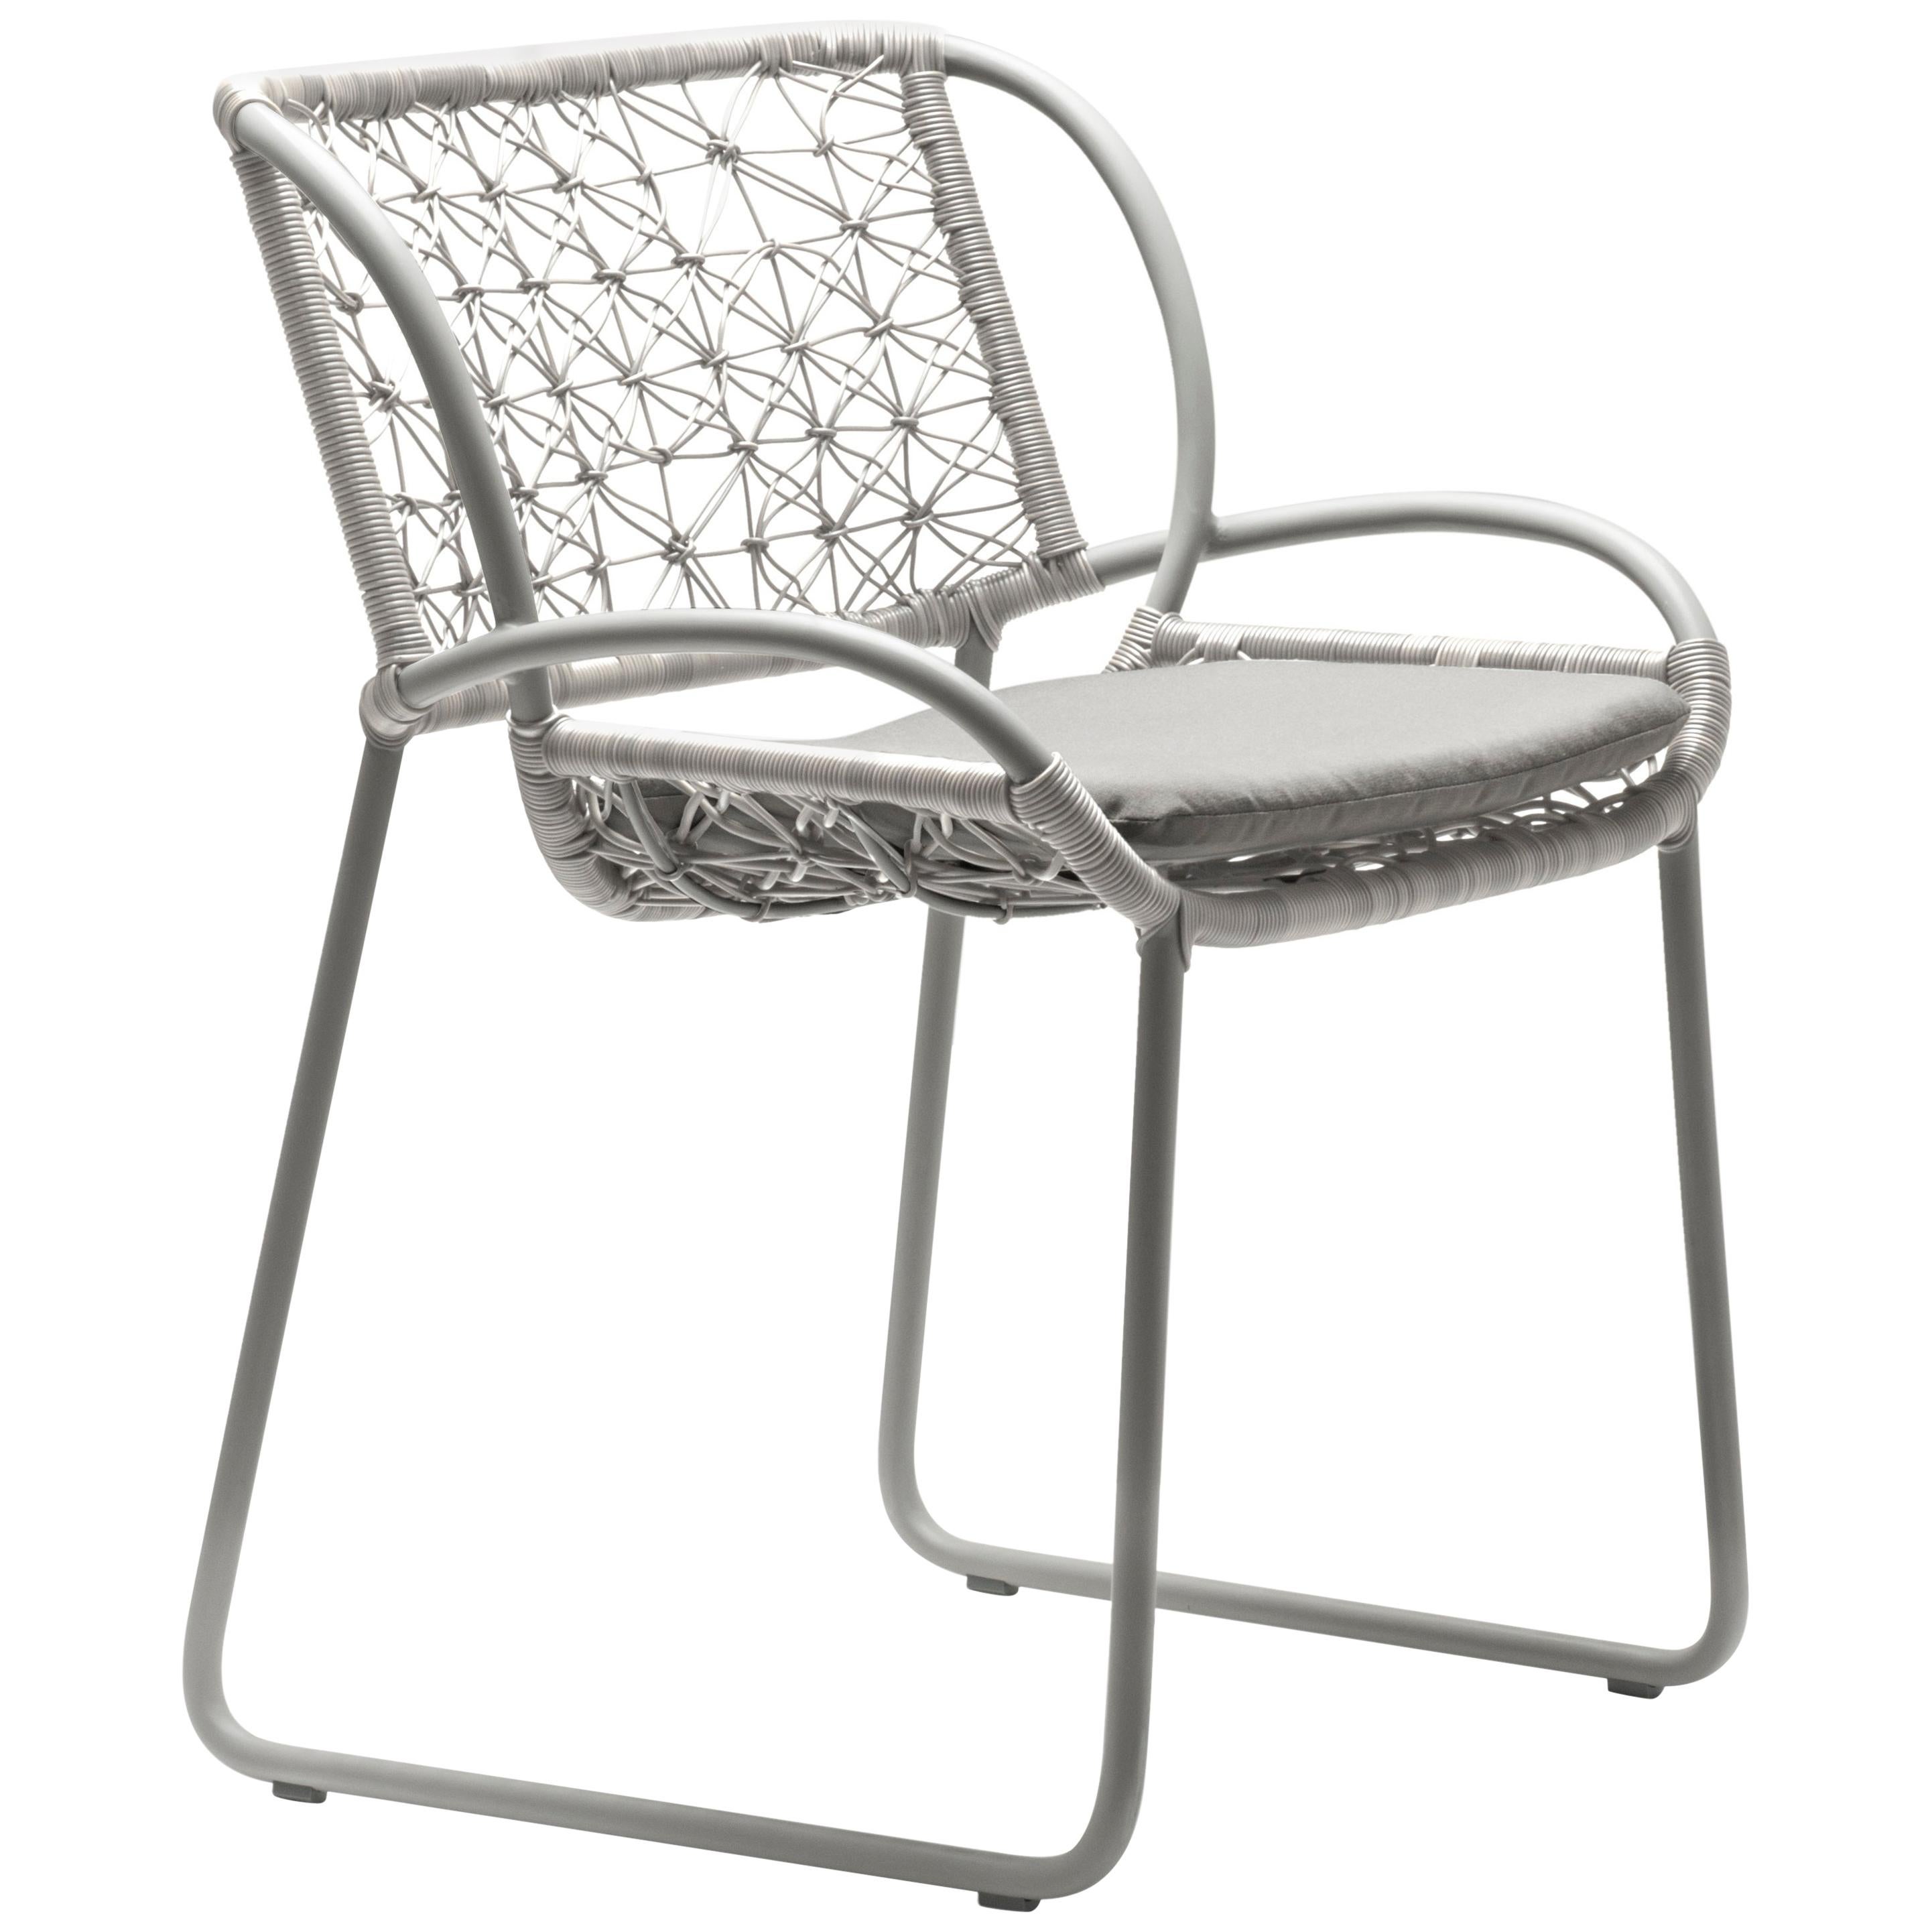 Adesso Pale Grey Armchair by Kenneth Cobonpue For Sale